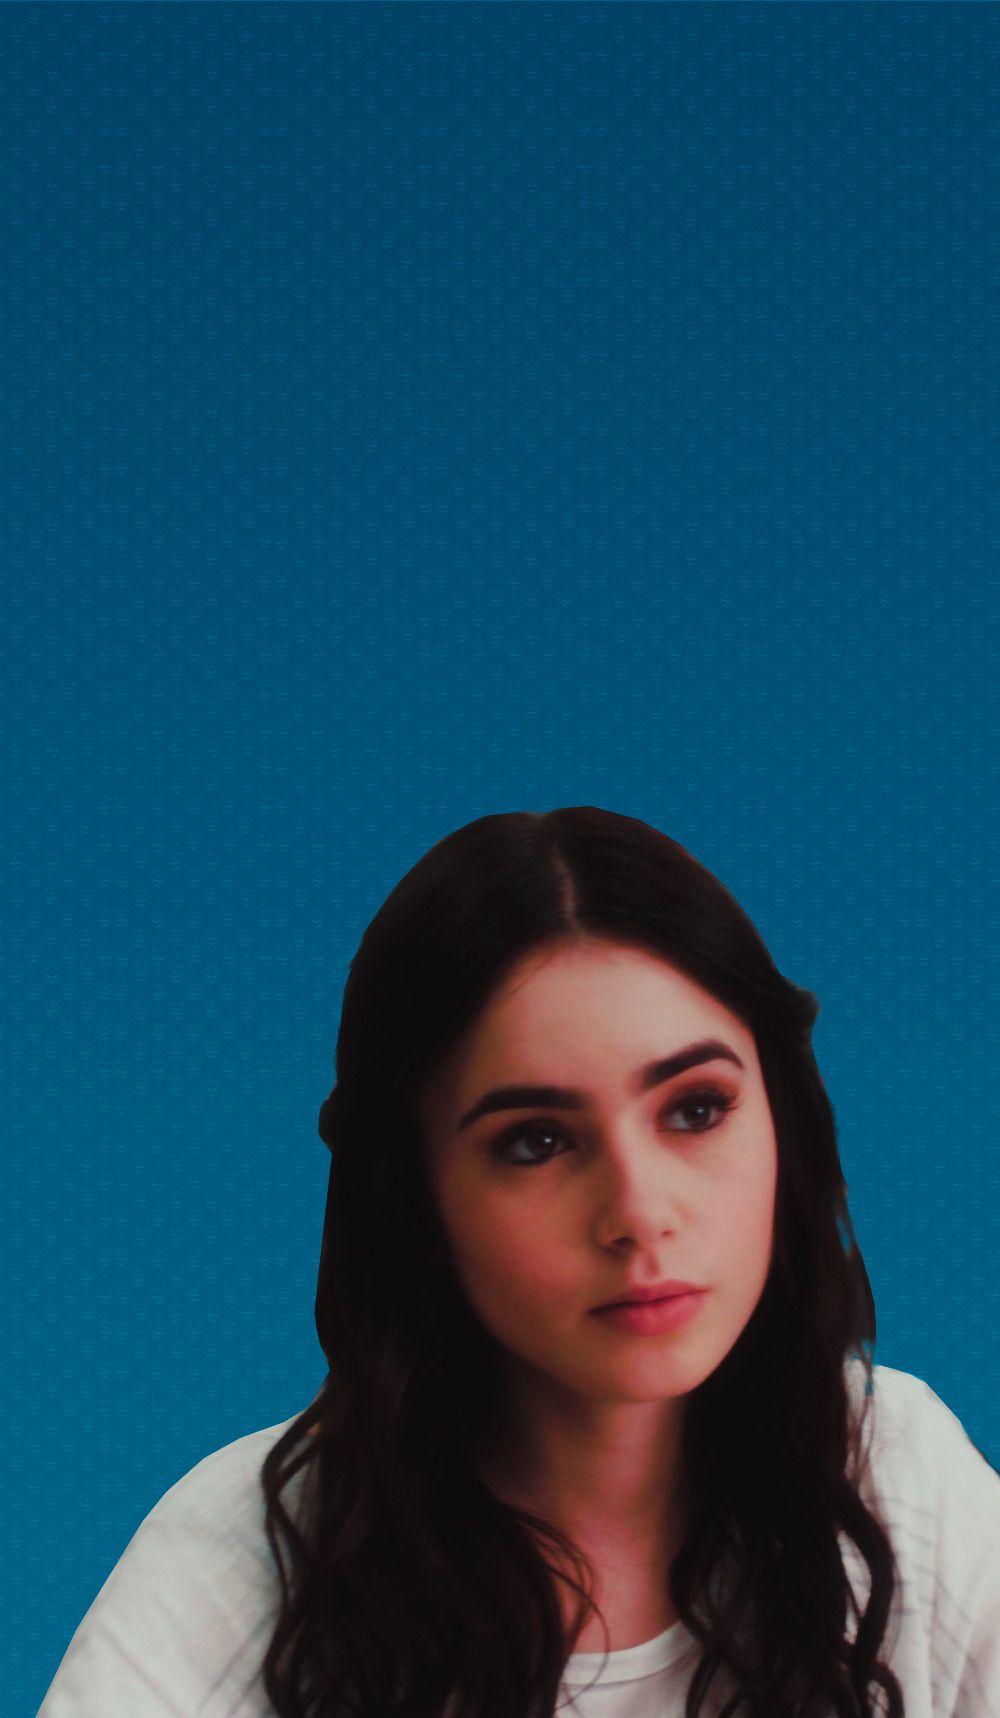 Lily Collins. Wallpaper. +Fondos. Lily collins, Lily